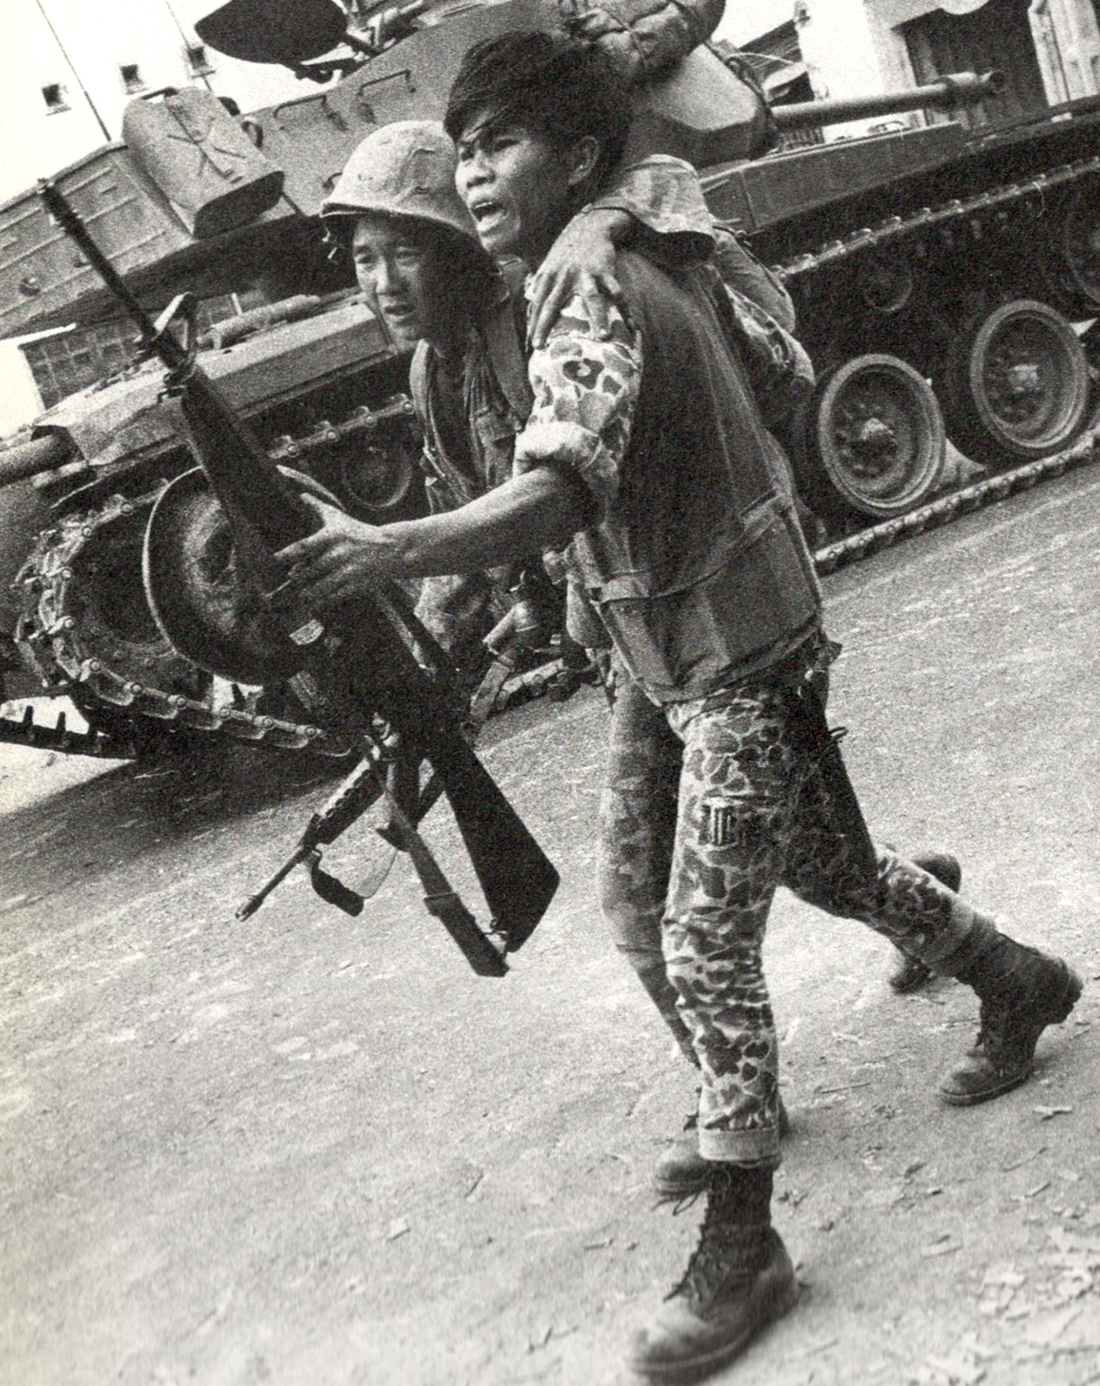 196802_arvn_wounded_in_saigon.jpg